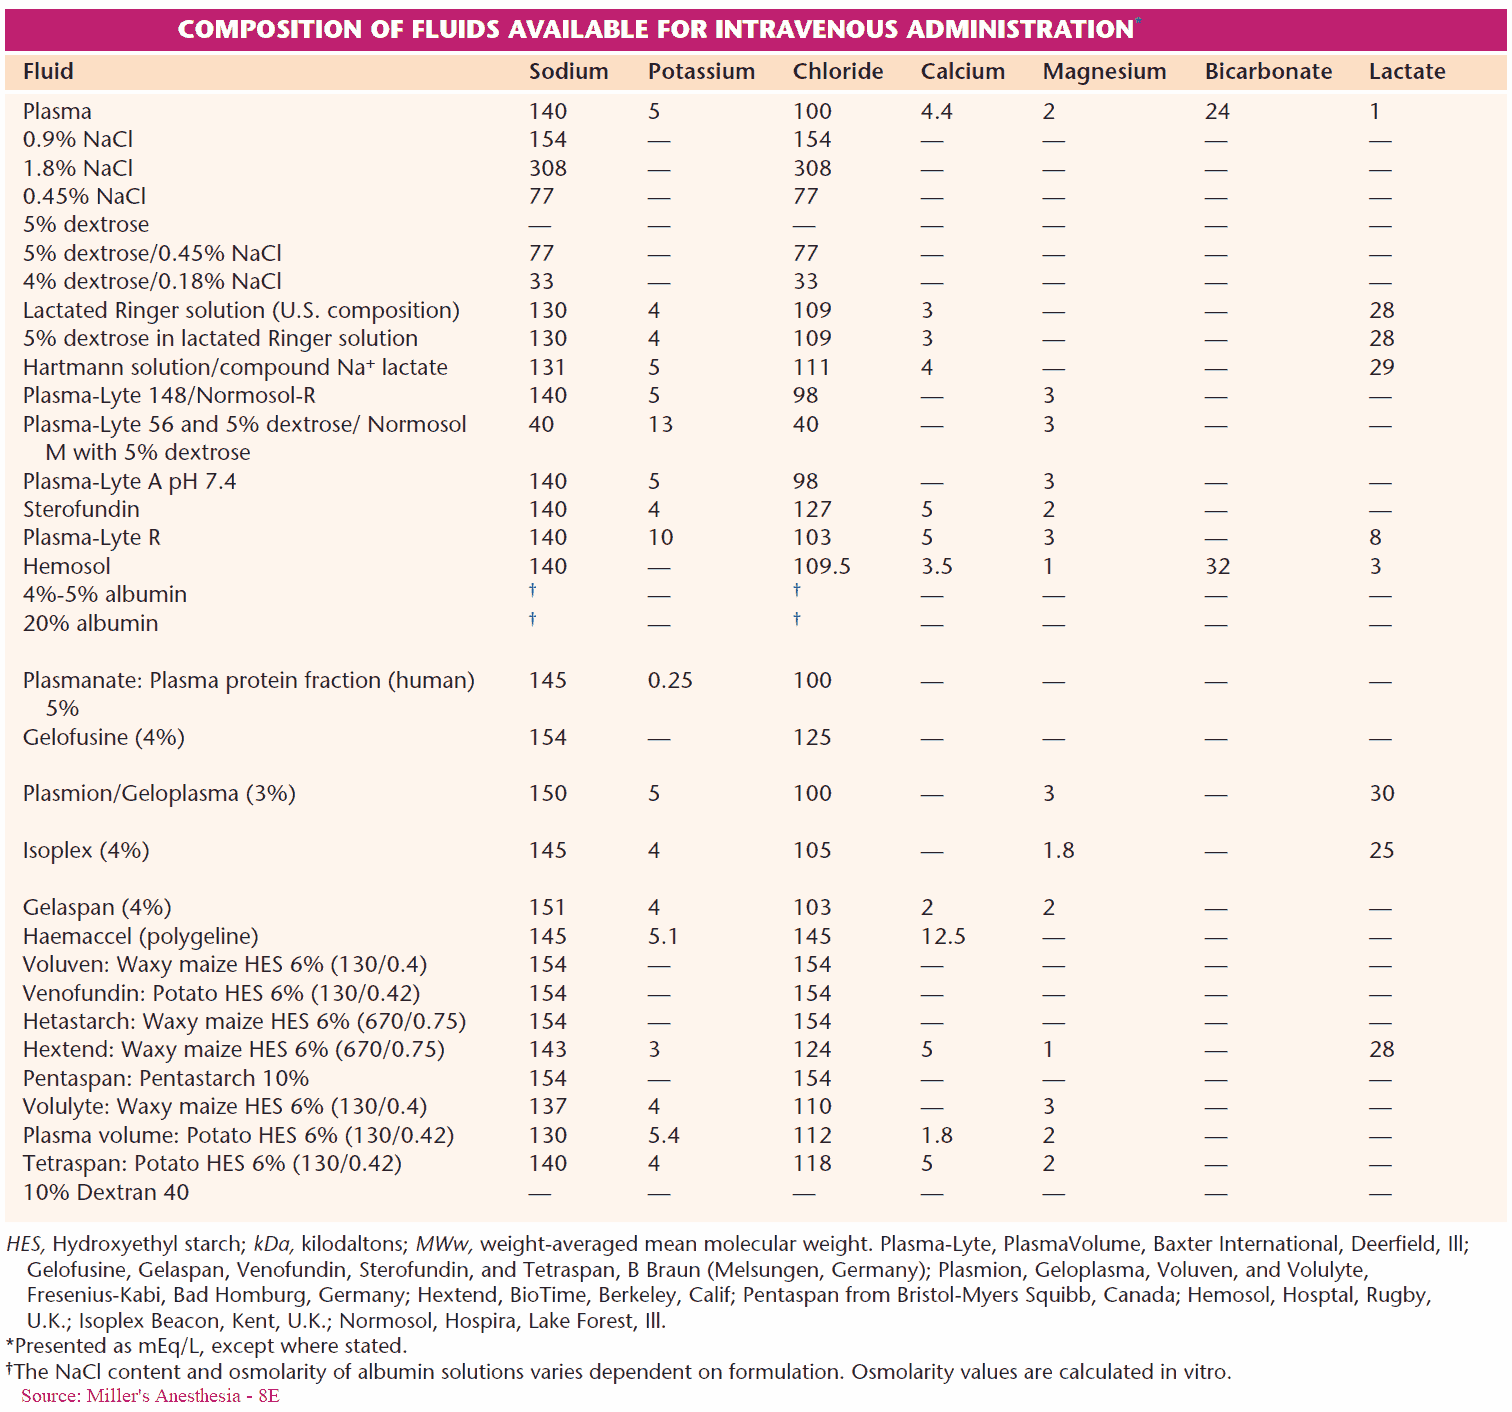 Composition of Fluids Available for Intravenous Administration